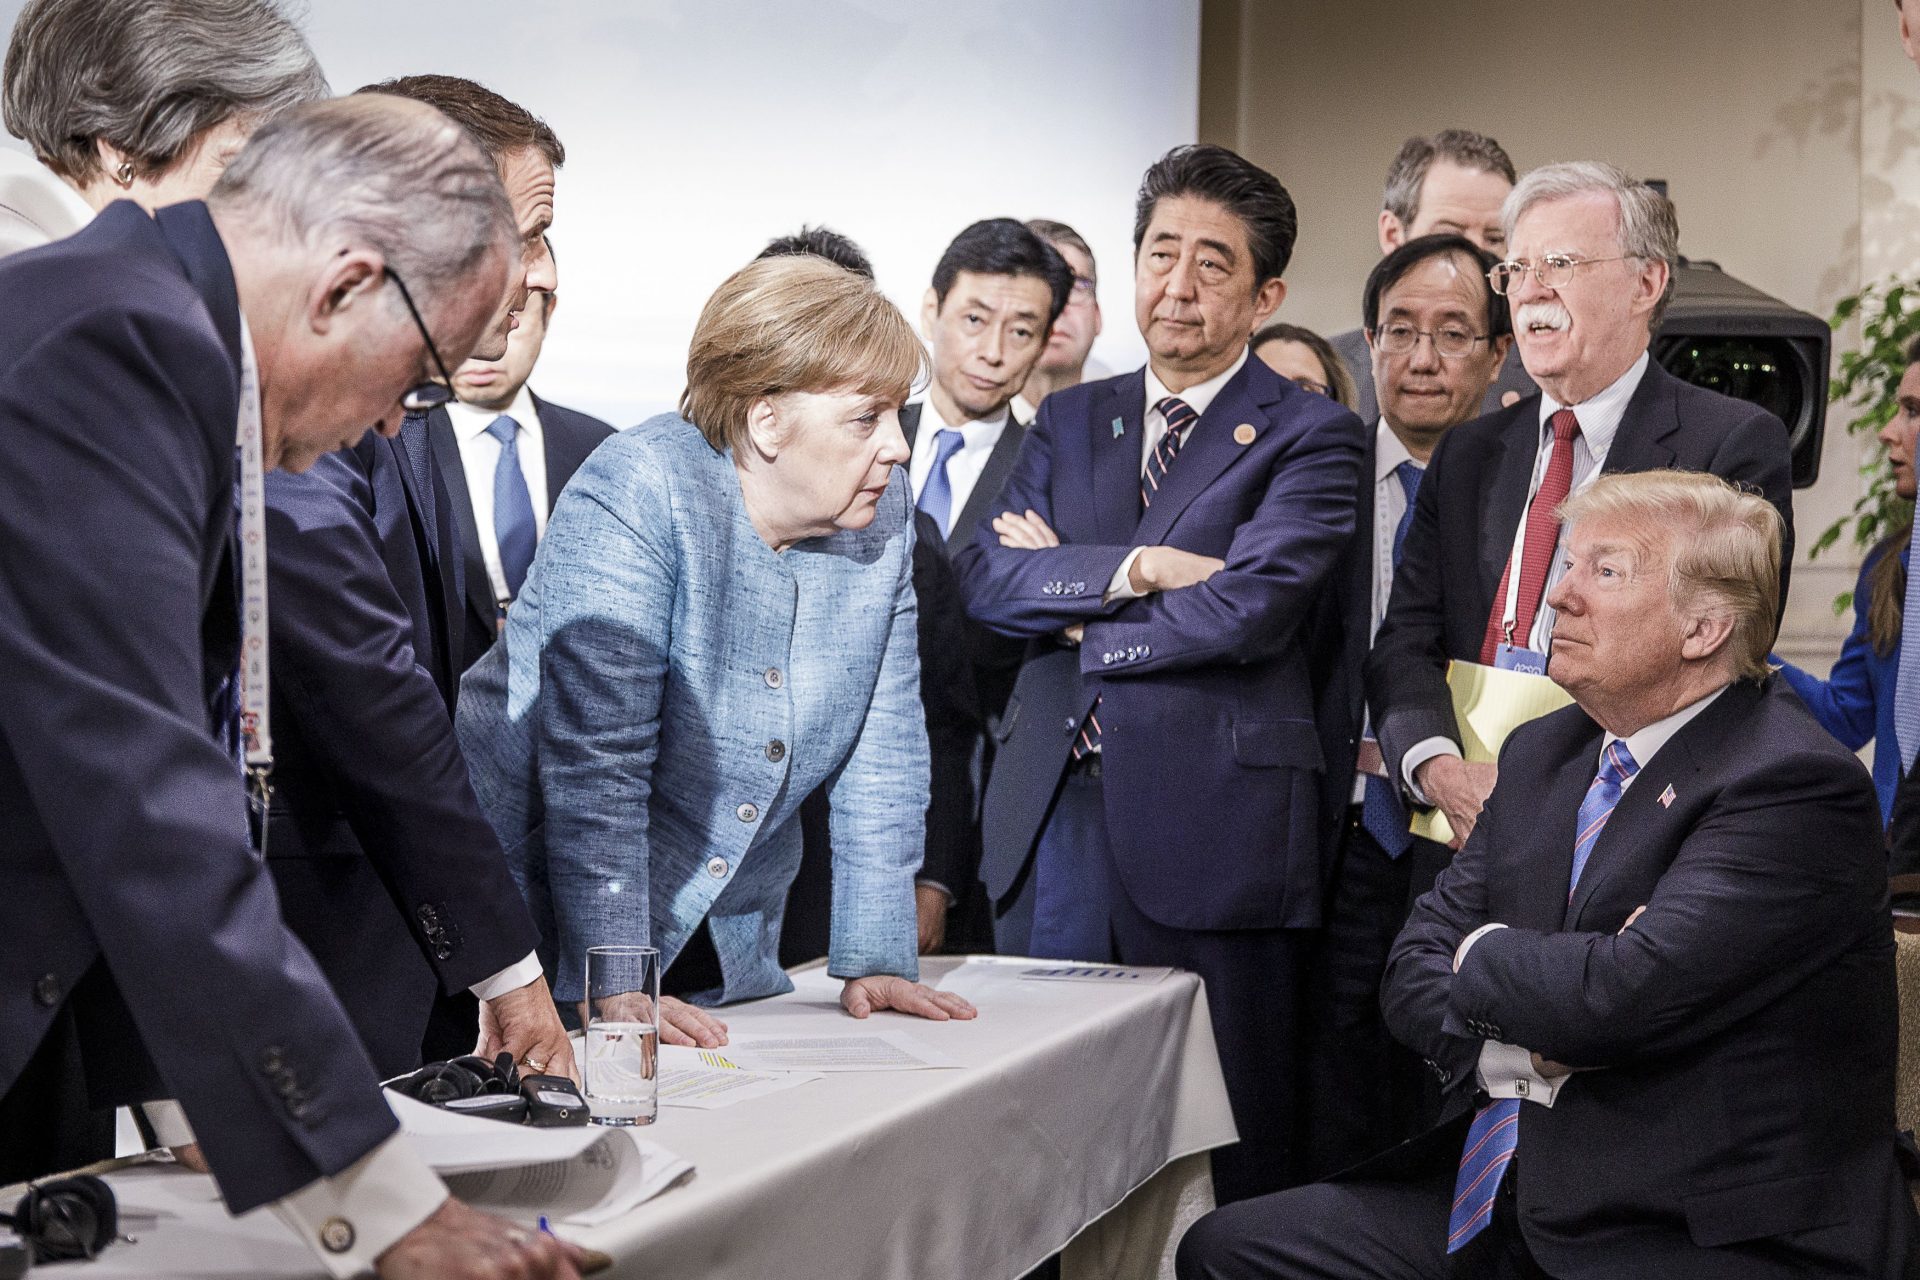 As other global leaders look on, Angela Merkel leads a debate with then US president Donald Trump at the 2018 G7 summit in Canada. Photo: Jesco Denzel / Bundesregierung